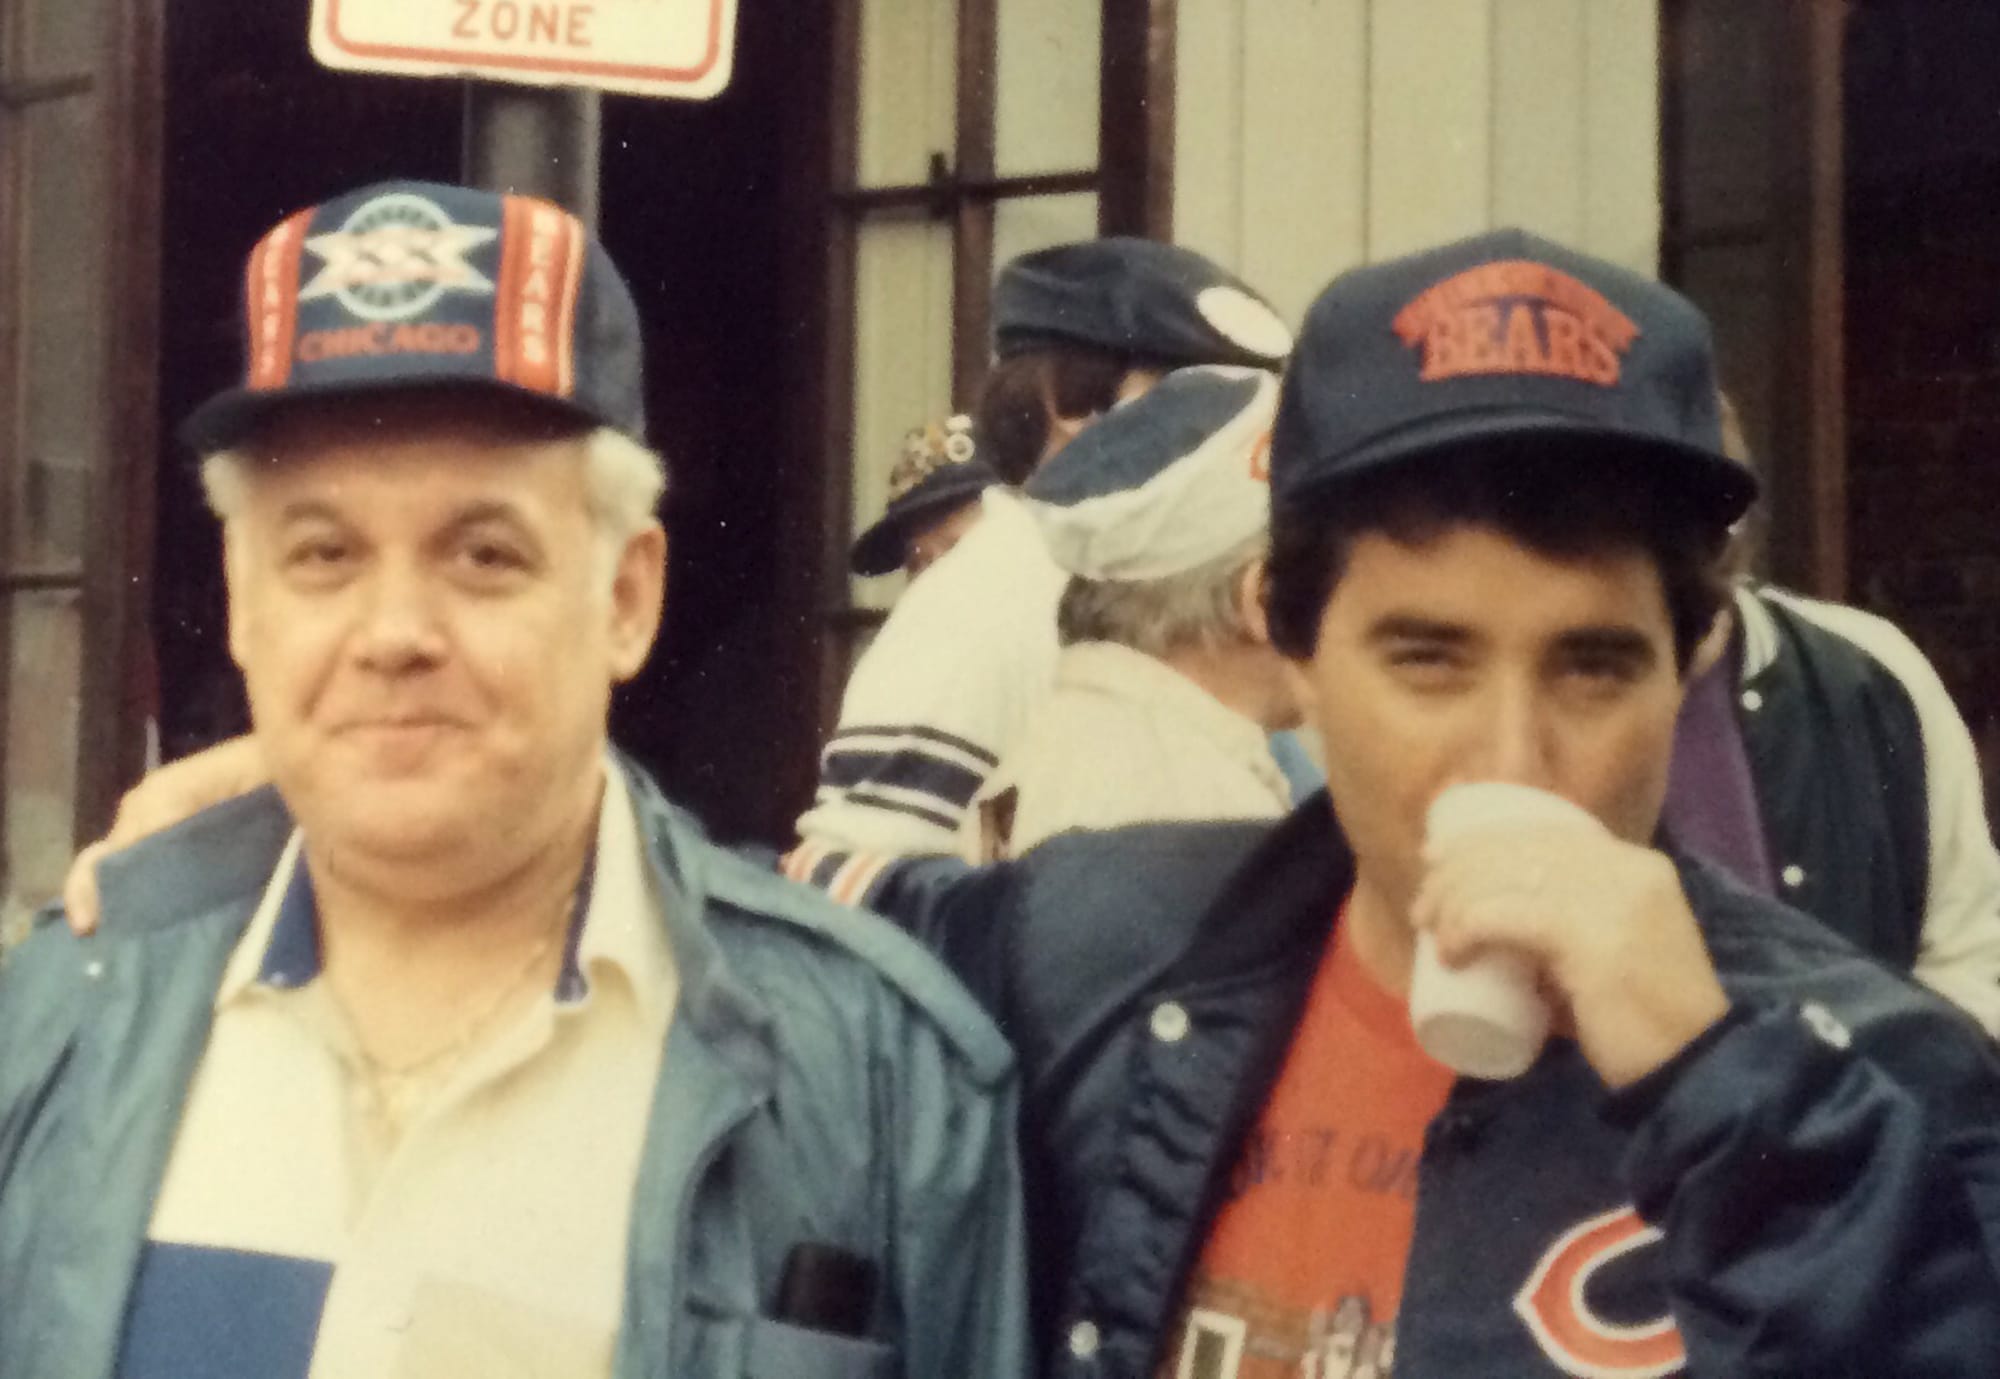 Lou Brancaccio and his godfather, together at the 1986 Super Bowl in New Orleans.